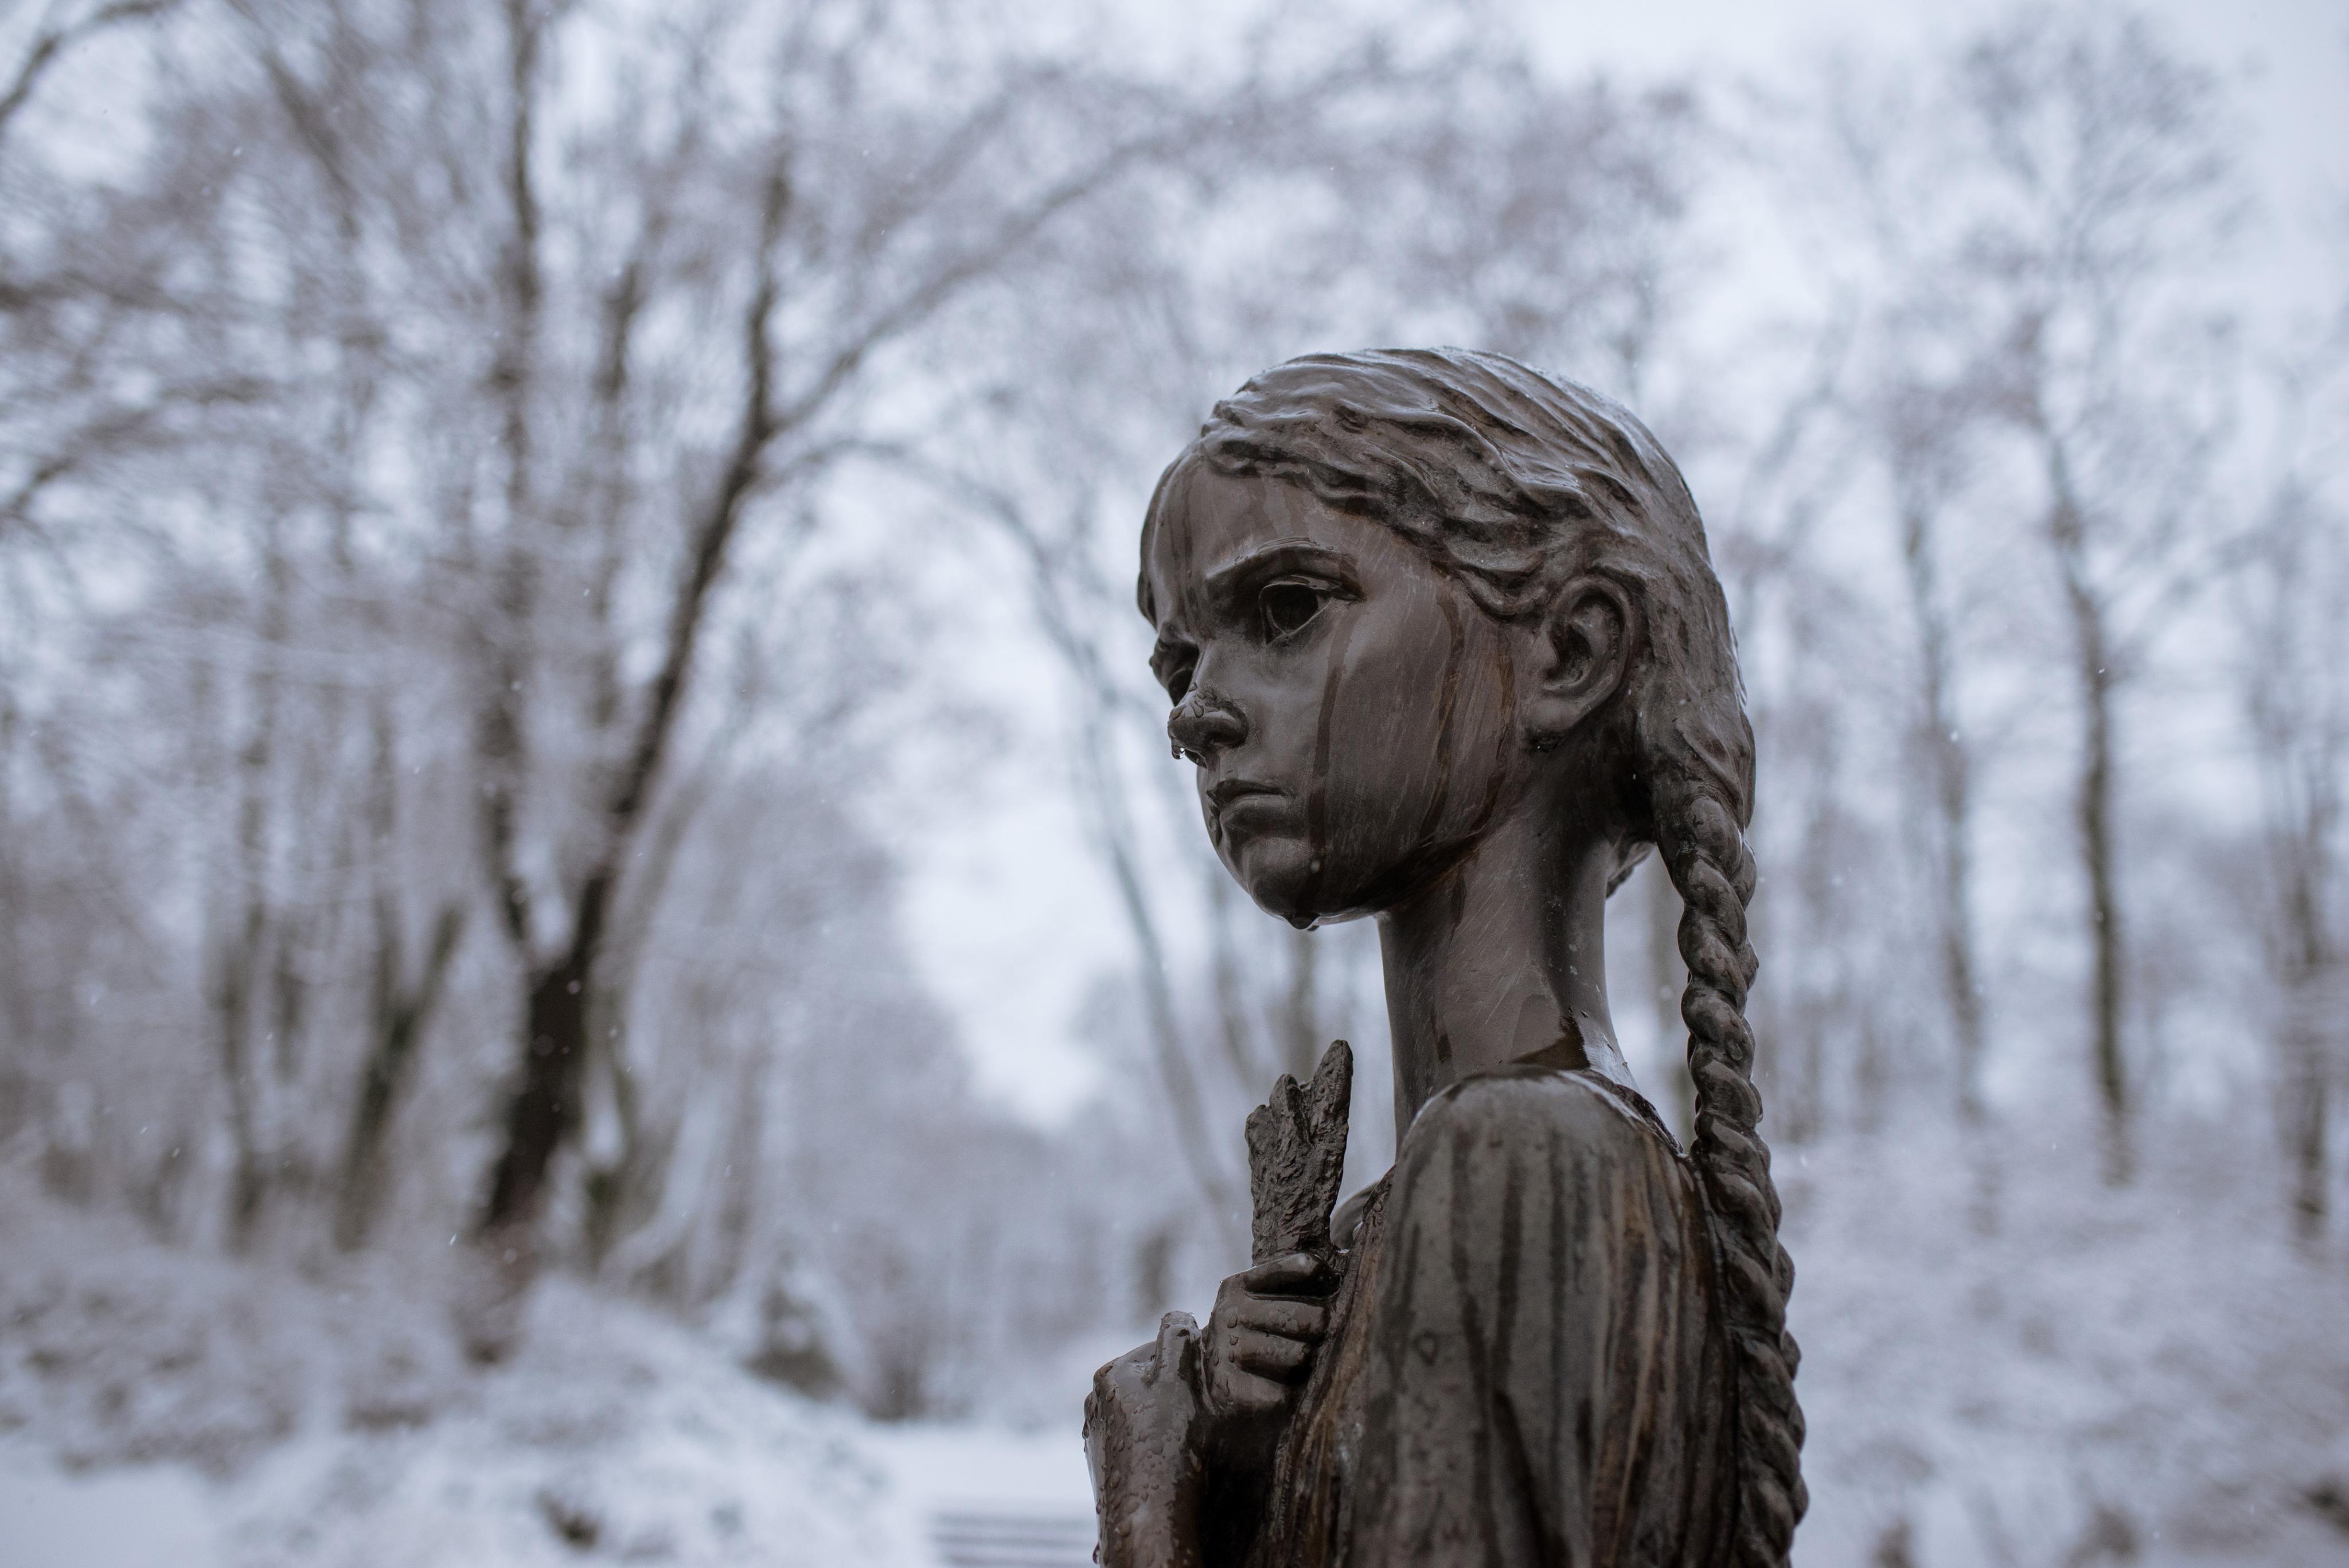 Detail of the Holodomor victims memorial in Kyiv.